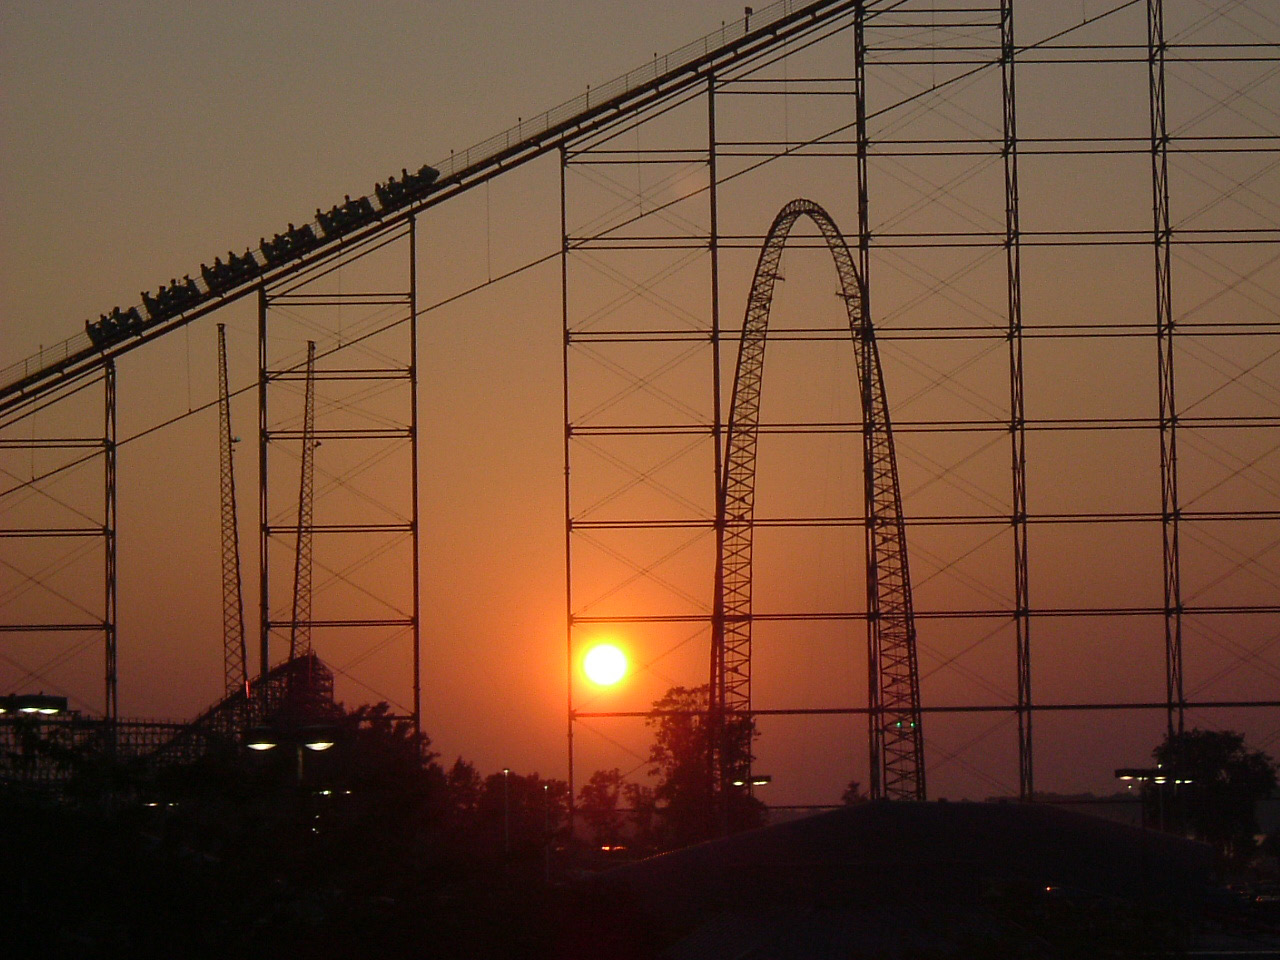 Picture was taken at Cedar Point in Ohio